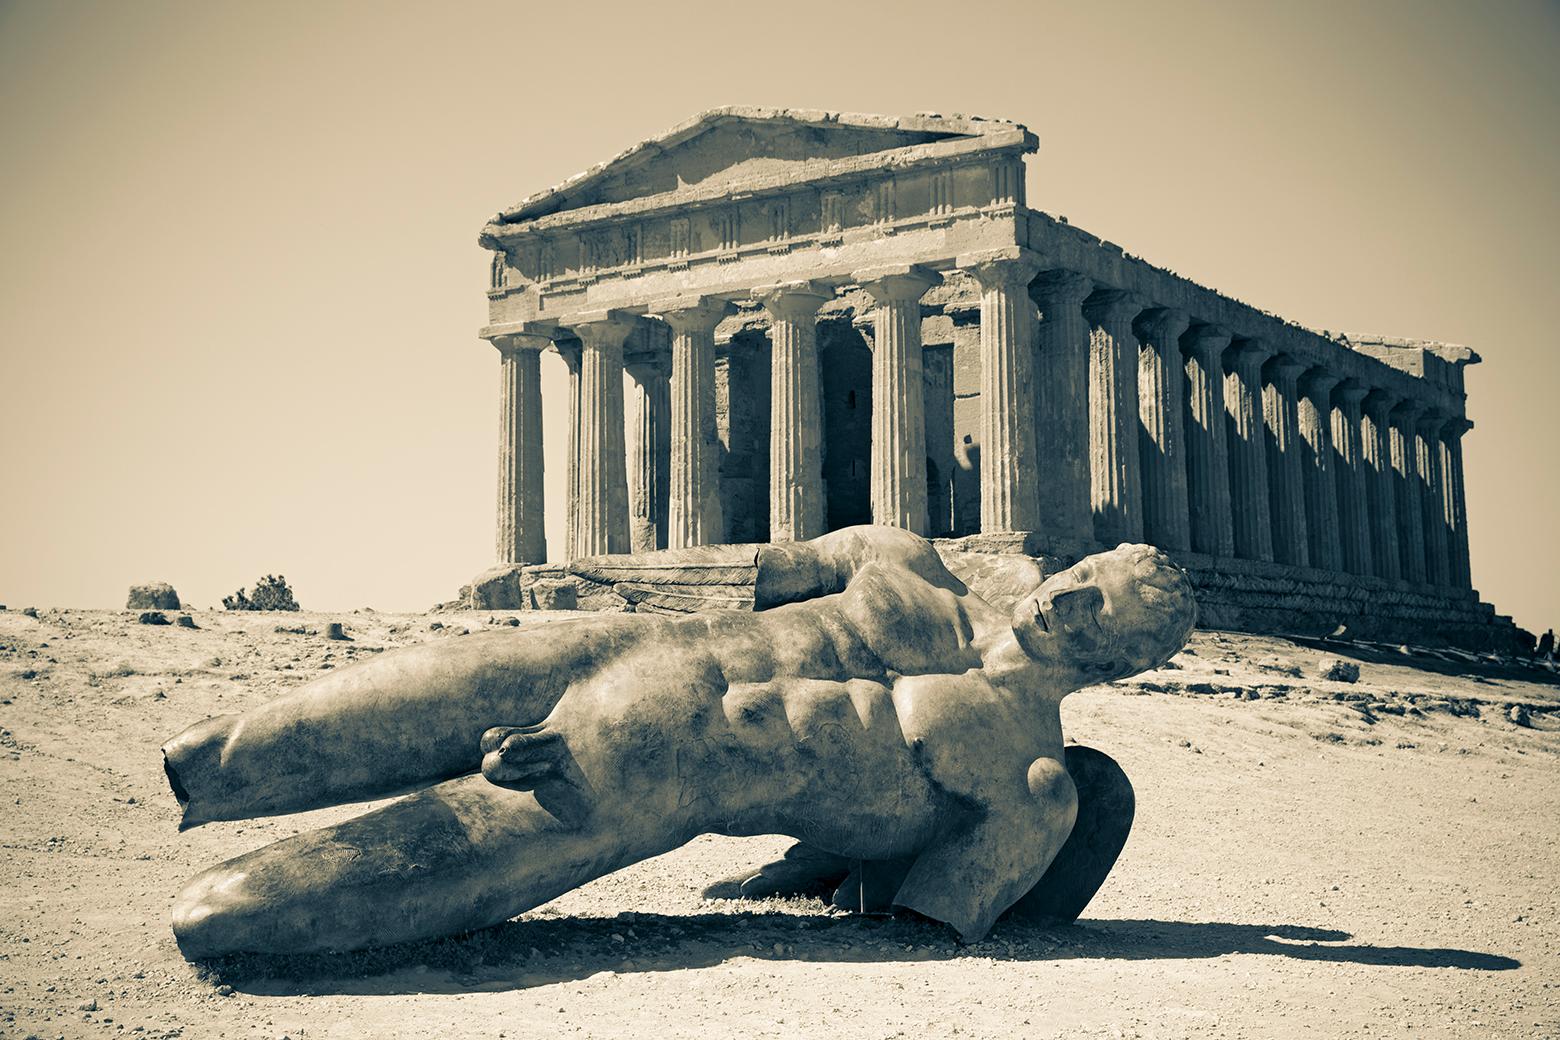 The Fallen Icarus, Temple of Concord, Agrigento, Sicily, 2017 - Beige Landscape Photograph by Cosmo Condina